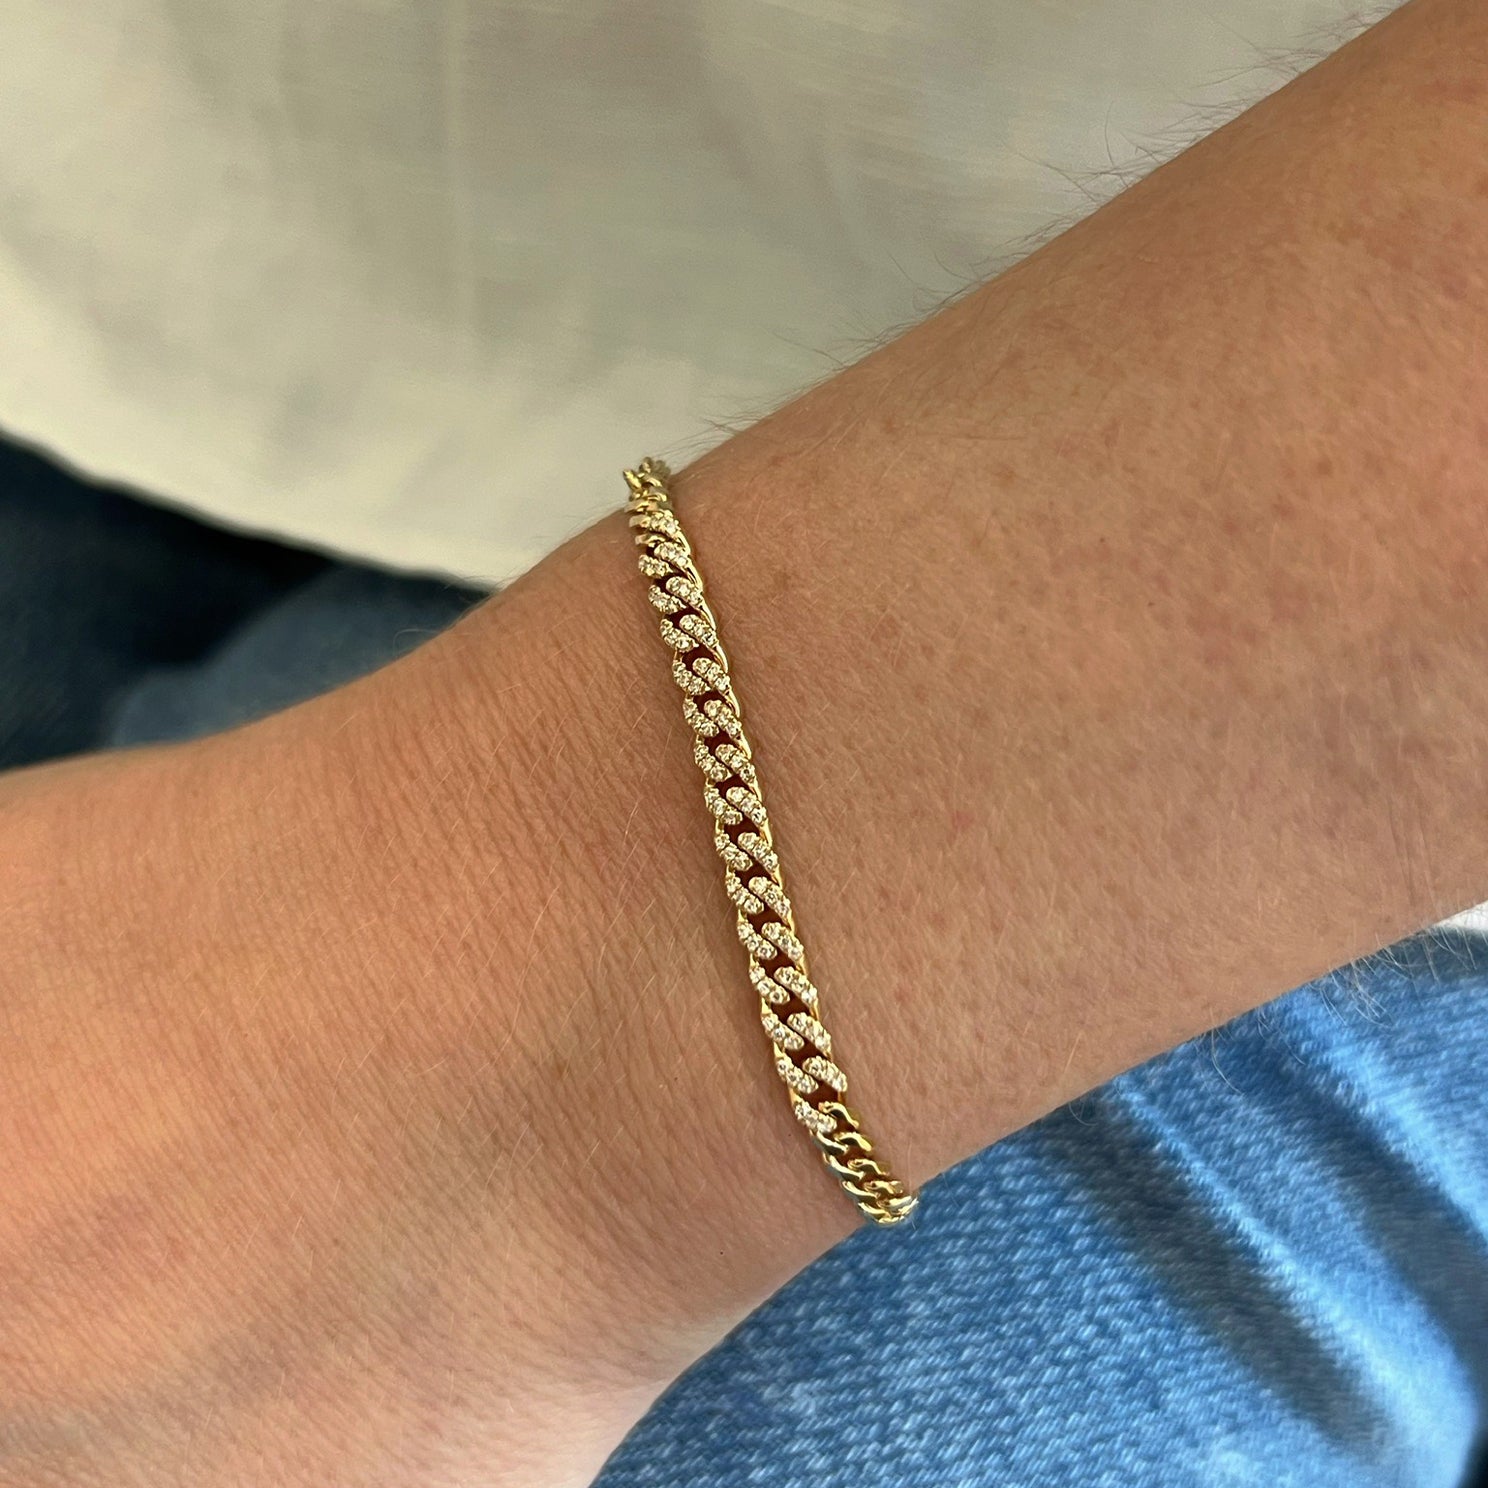 Extra Small Curb Chain Bracelet with Single Floating Diamond